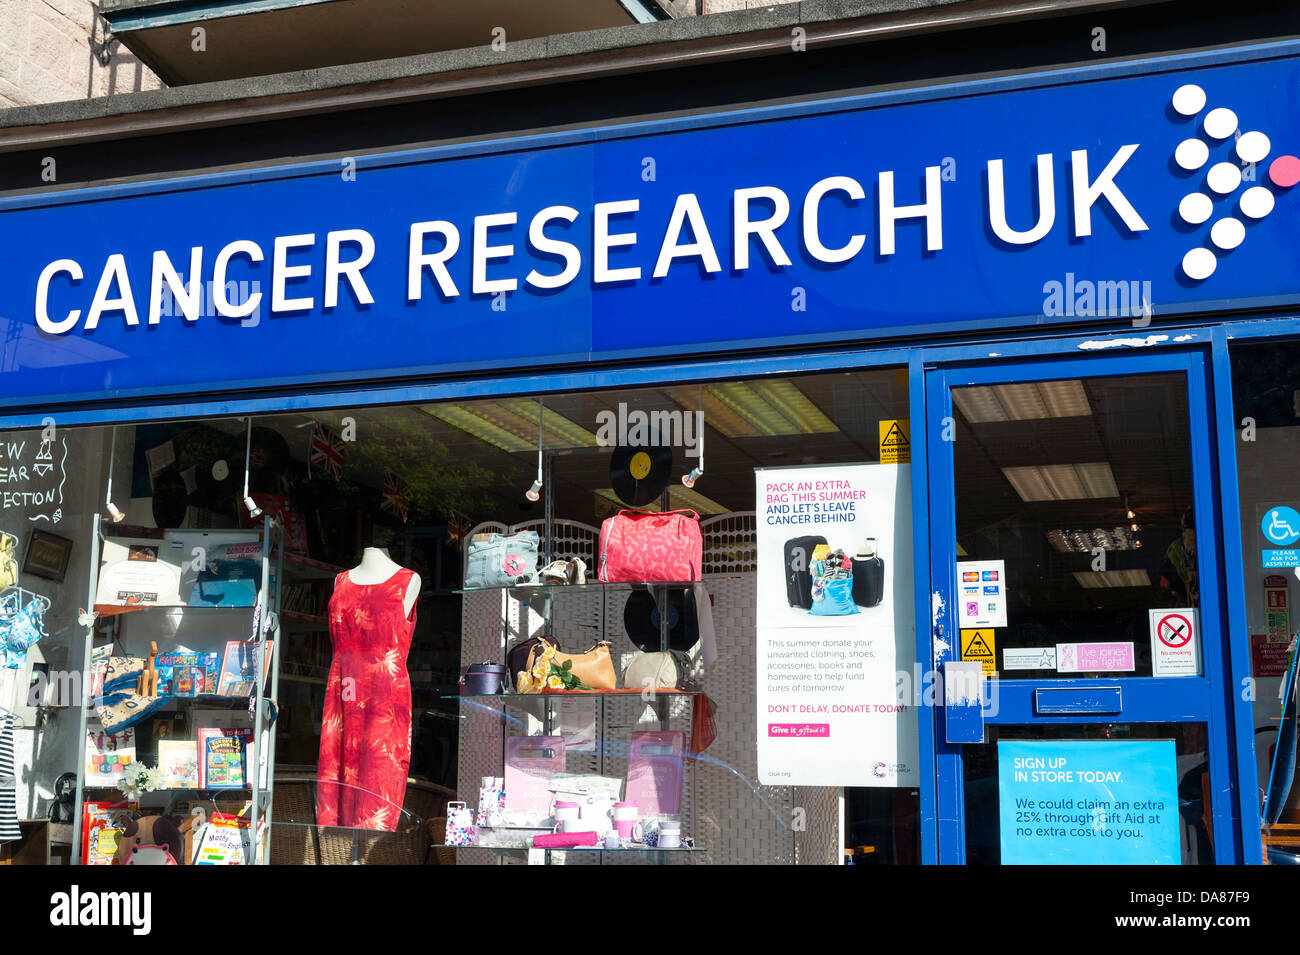 Cancer Research UK Charity Shop, UK. Stockfoto